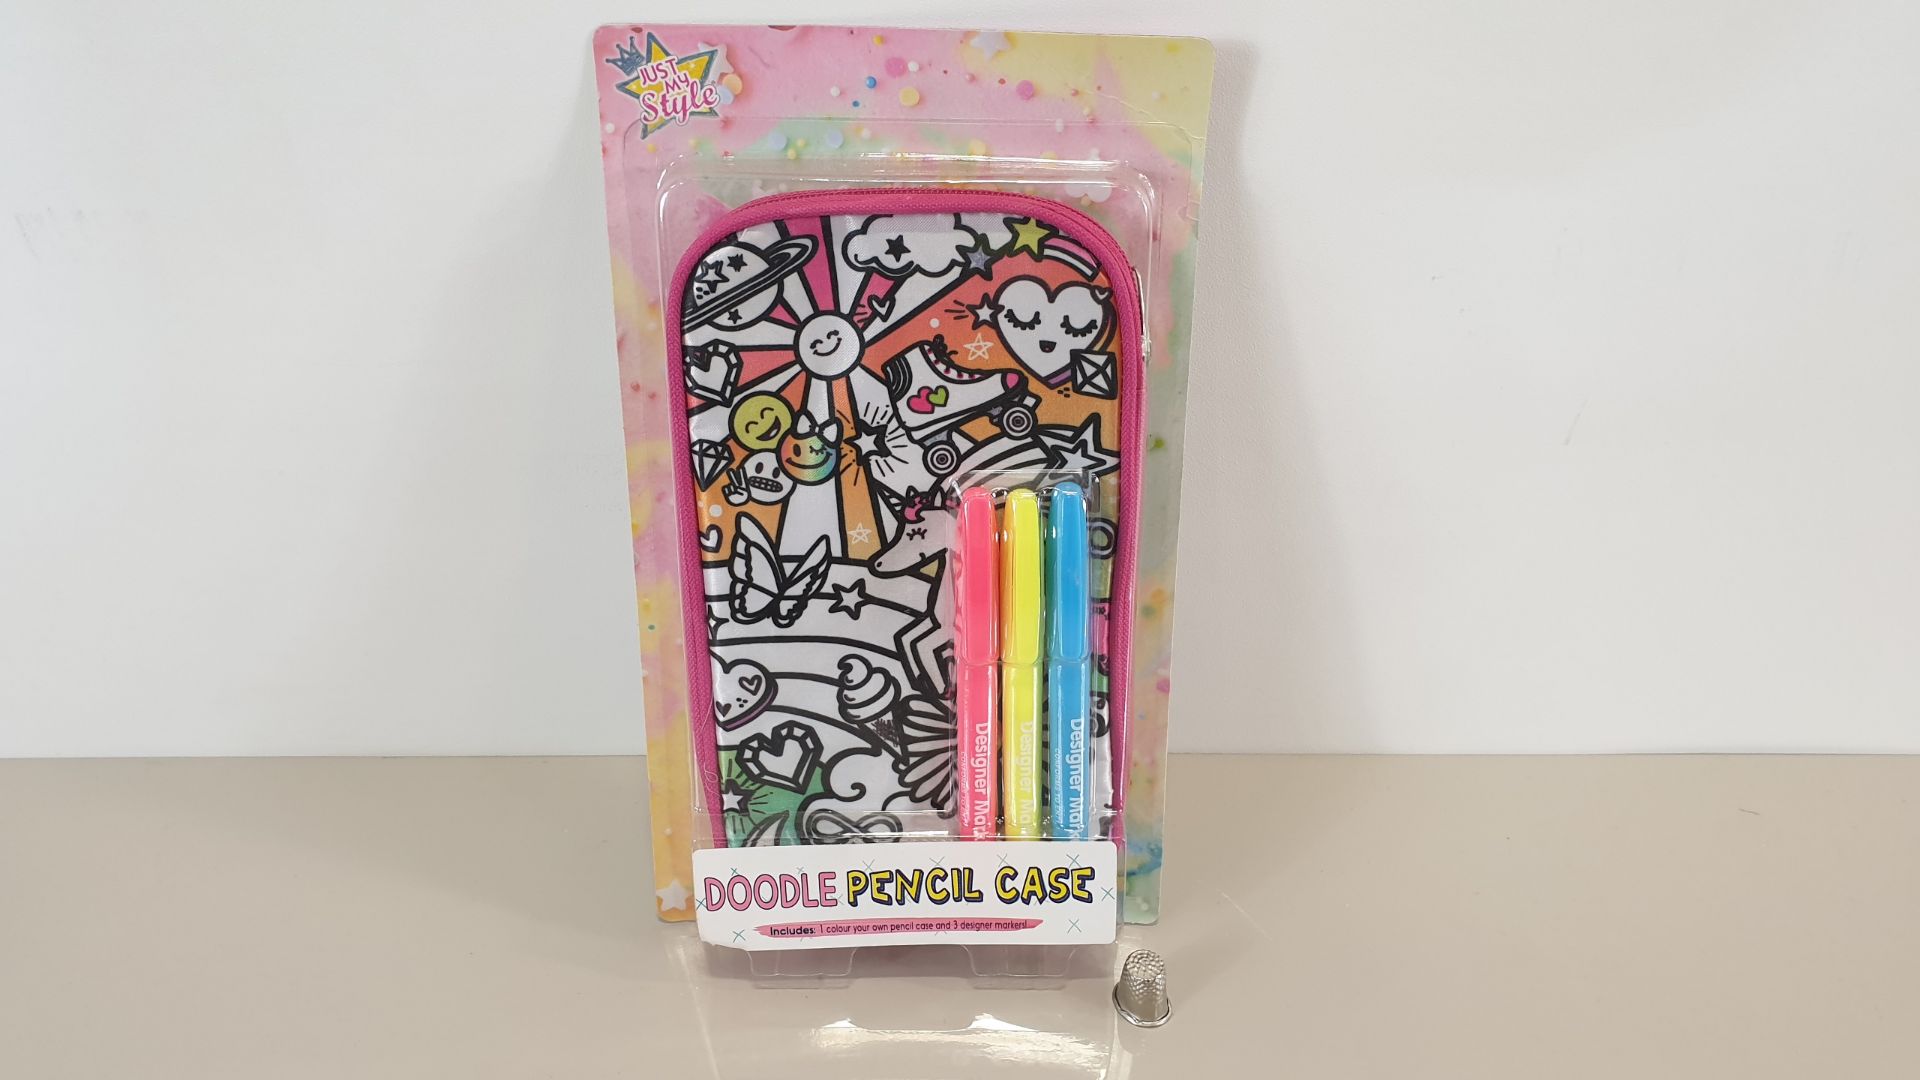 42 X JUST MY STYLE UNICORN DESIGN DOODLE PENCIL CASE COMPLETE WITH 3 COLOURED MARKERS (CONFORMING TO